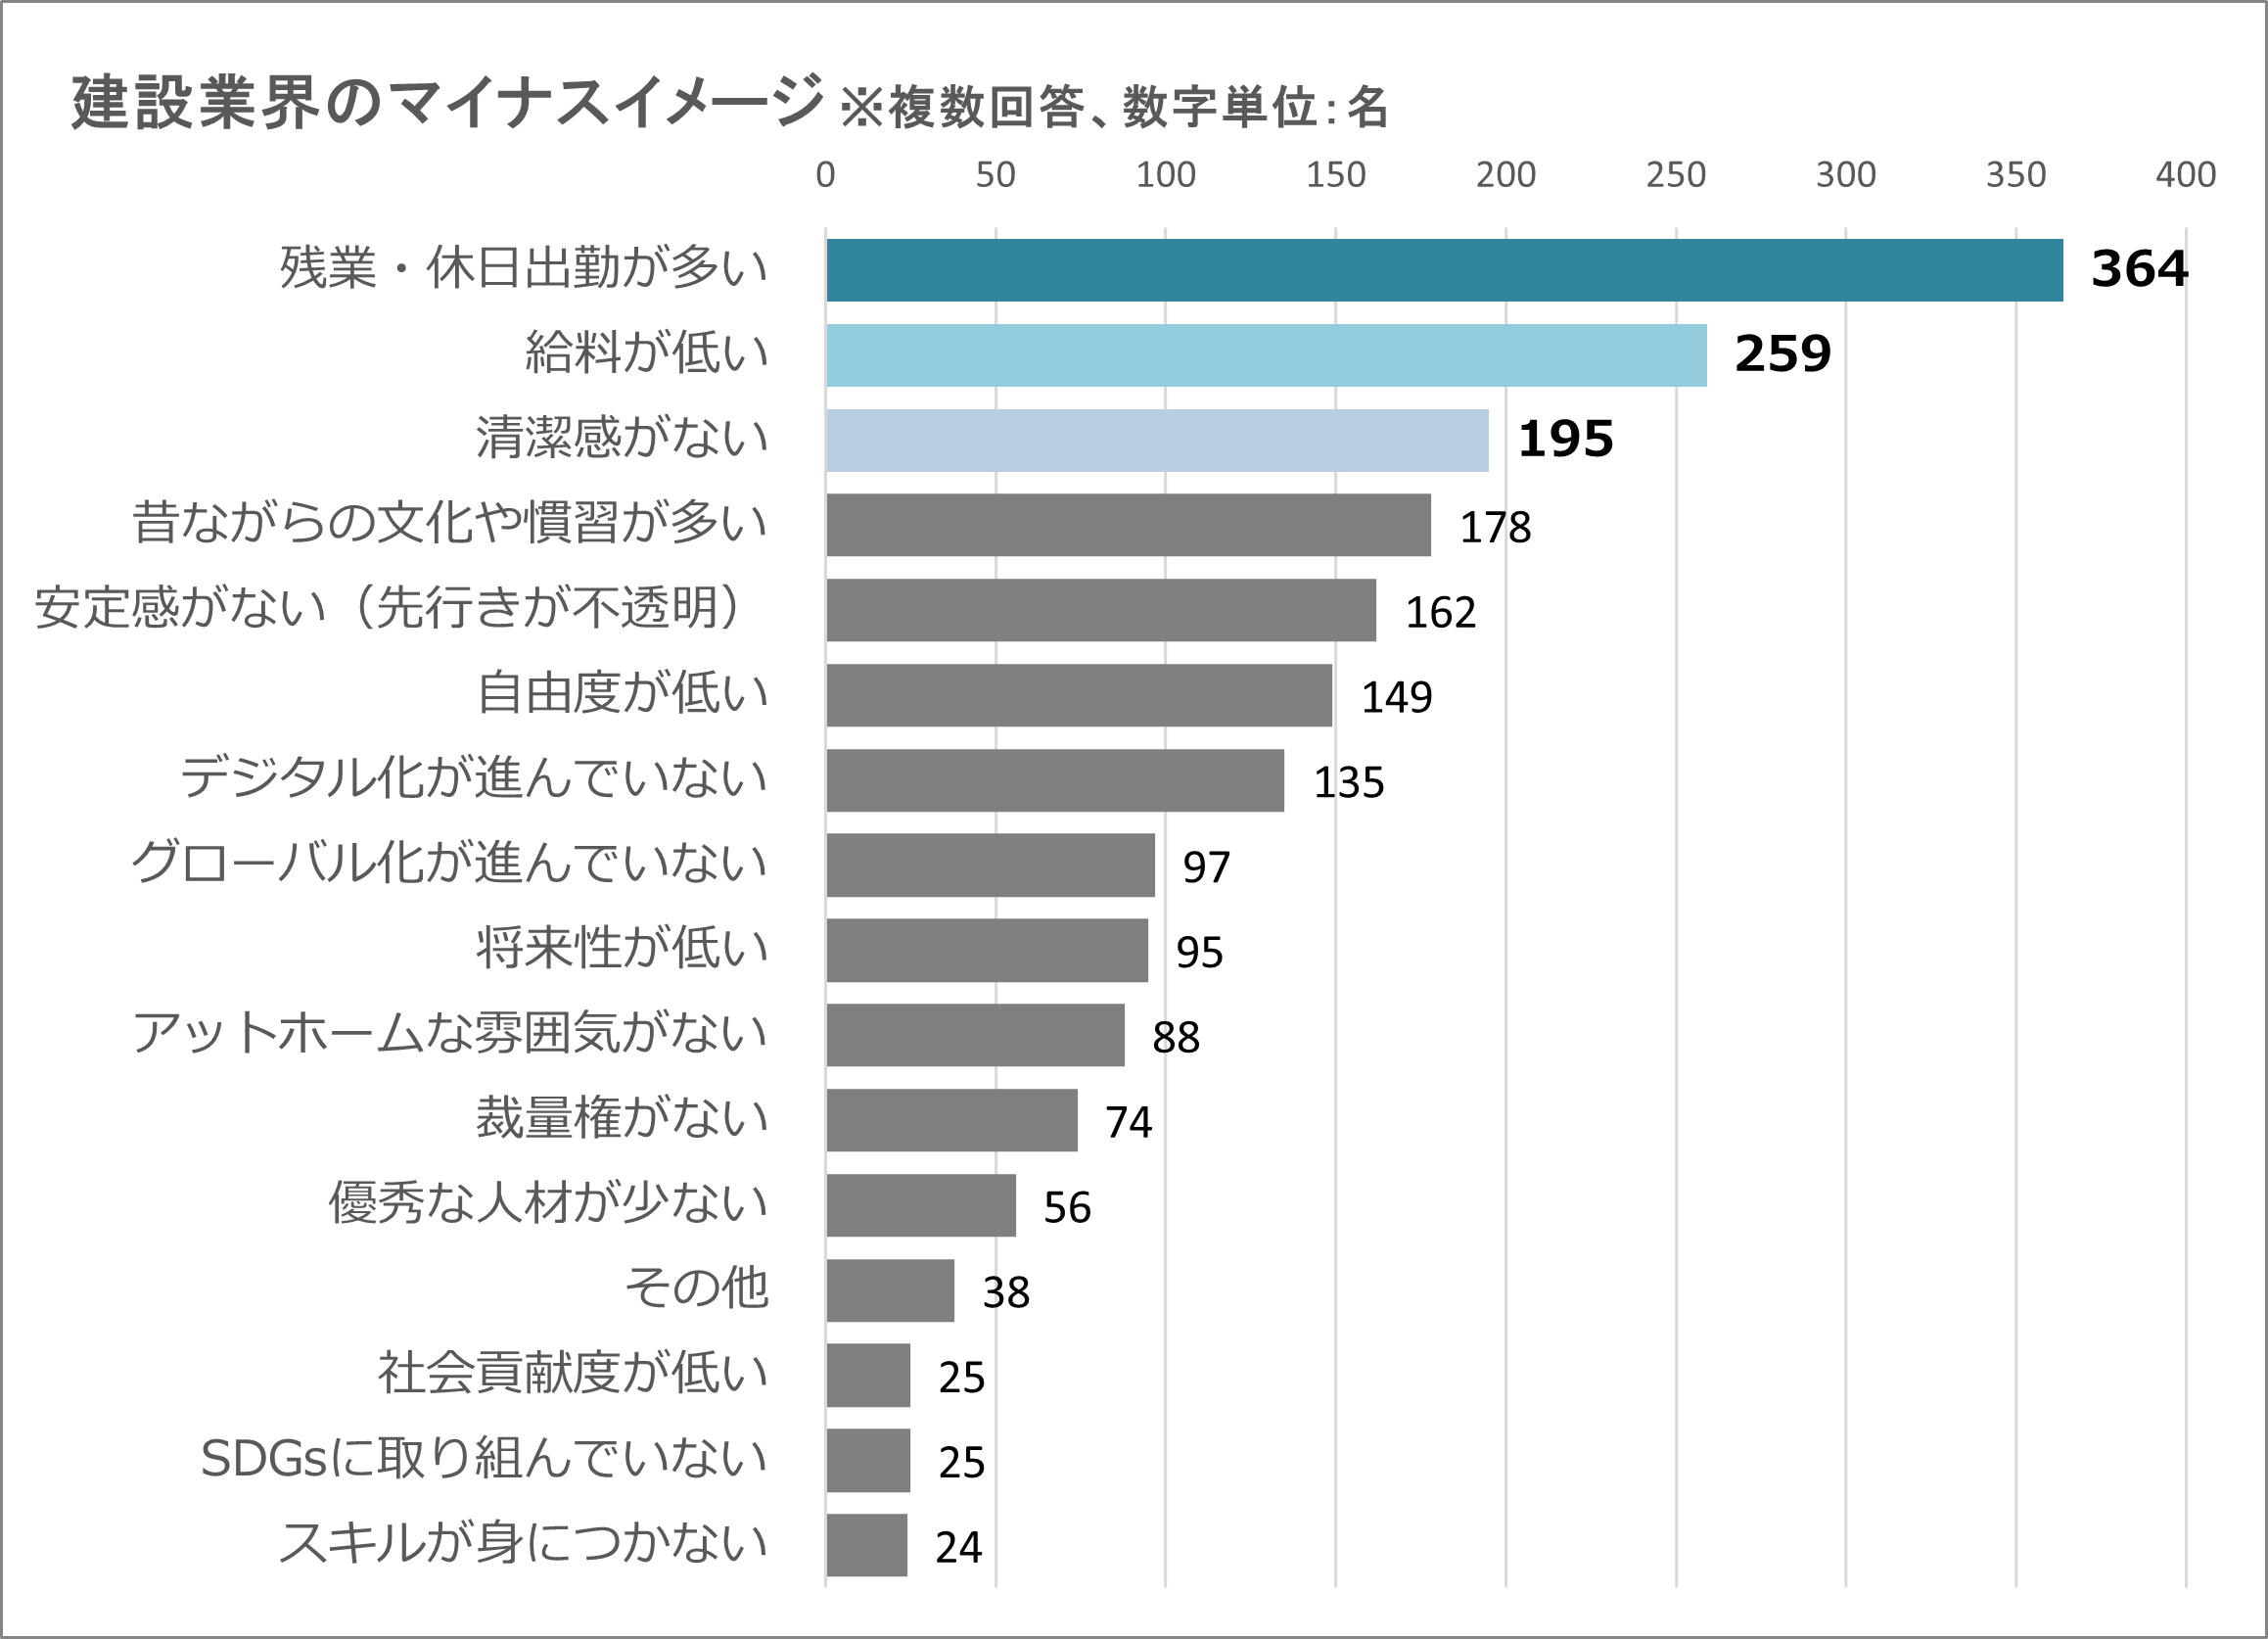 questionnaire_3_nohara_20230228.png